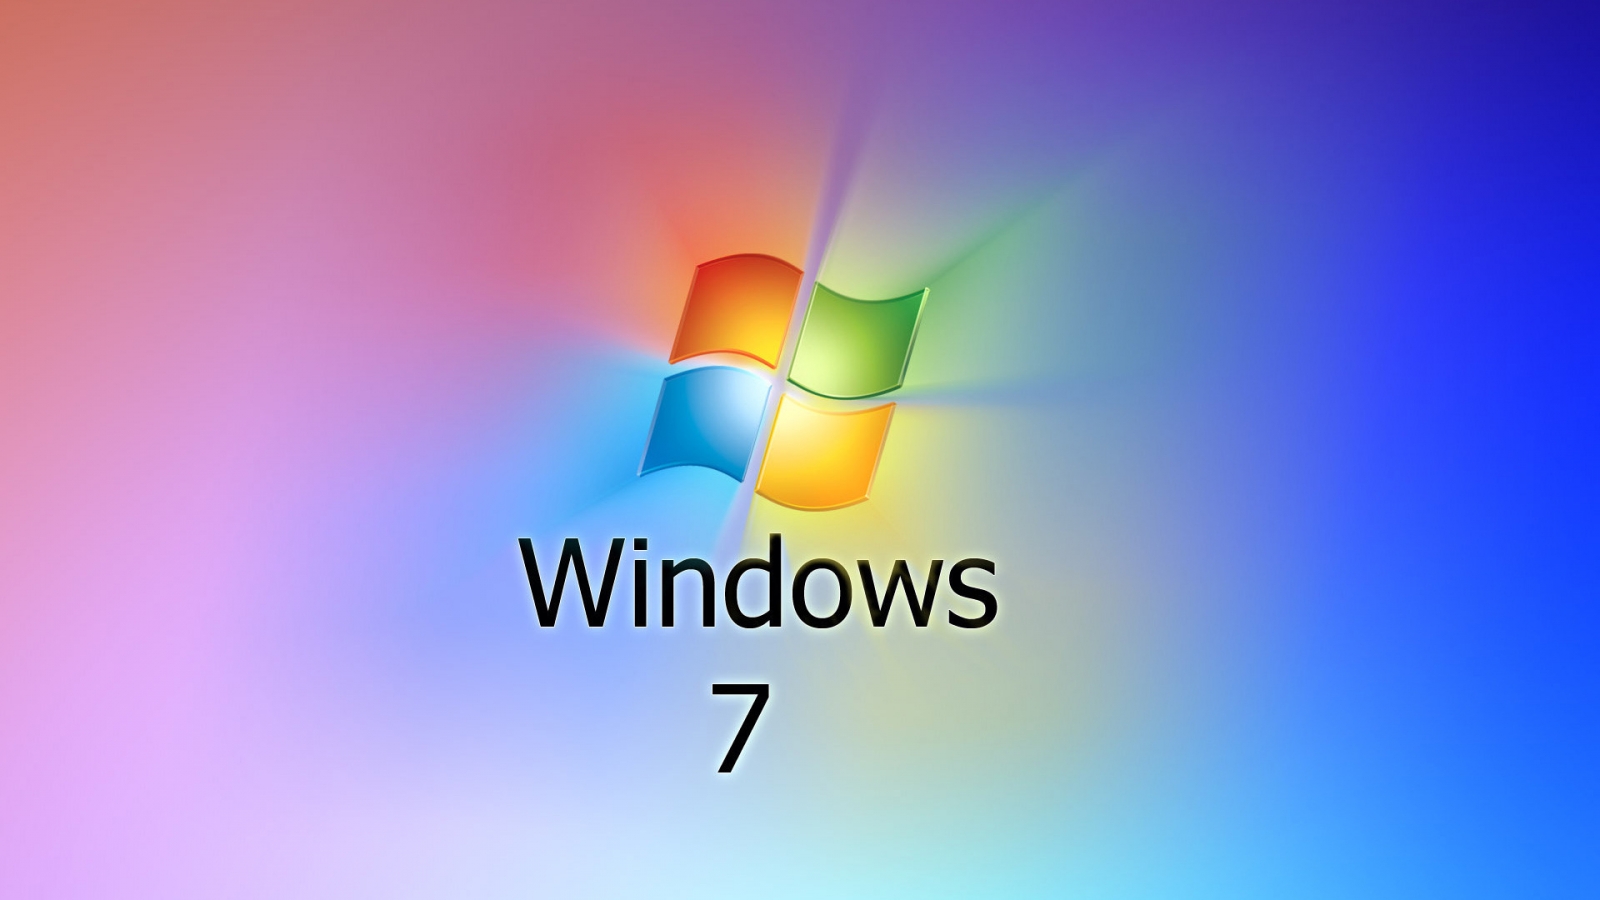 Windows 7 Simple for 1600 x 900 HDTV resolution